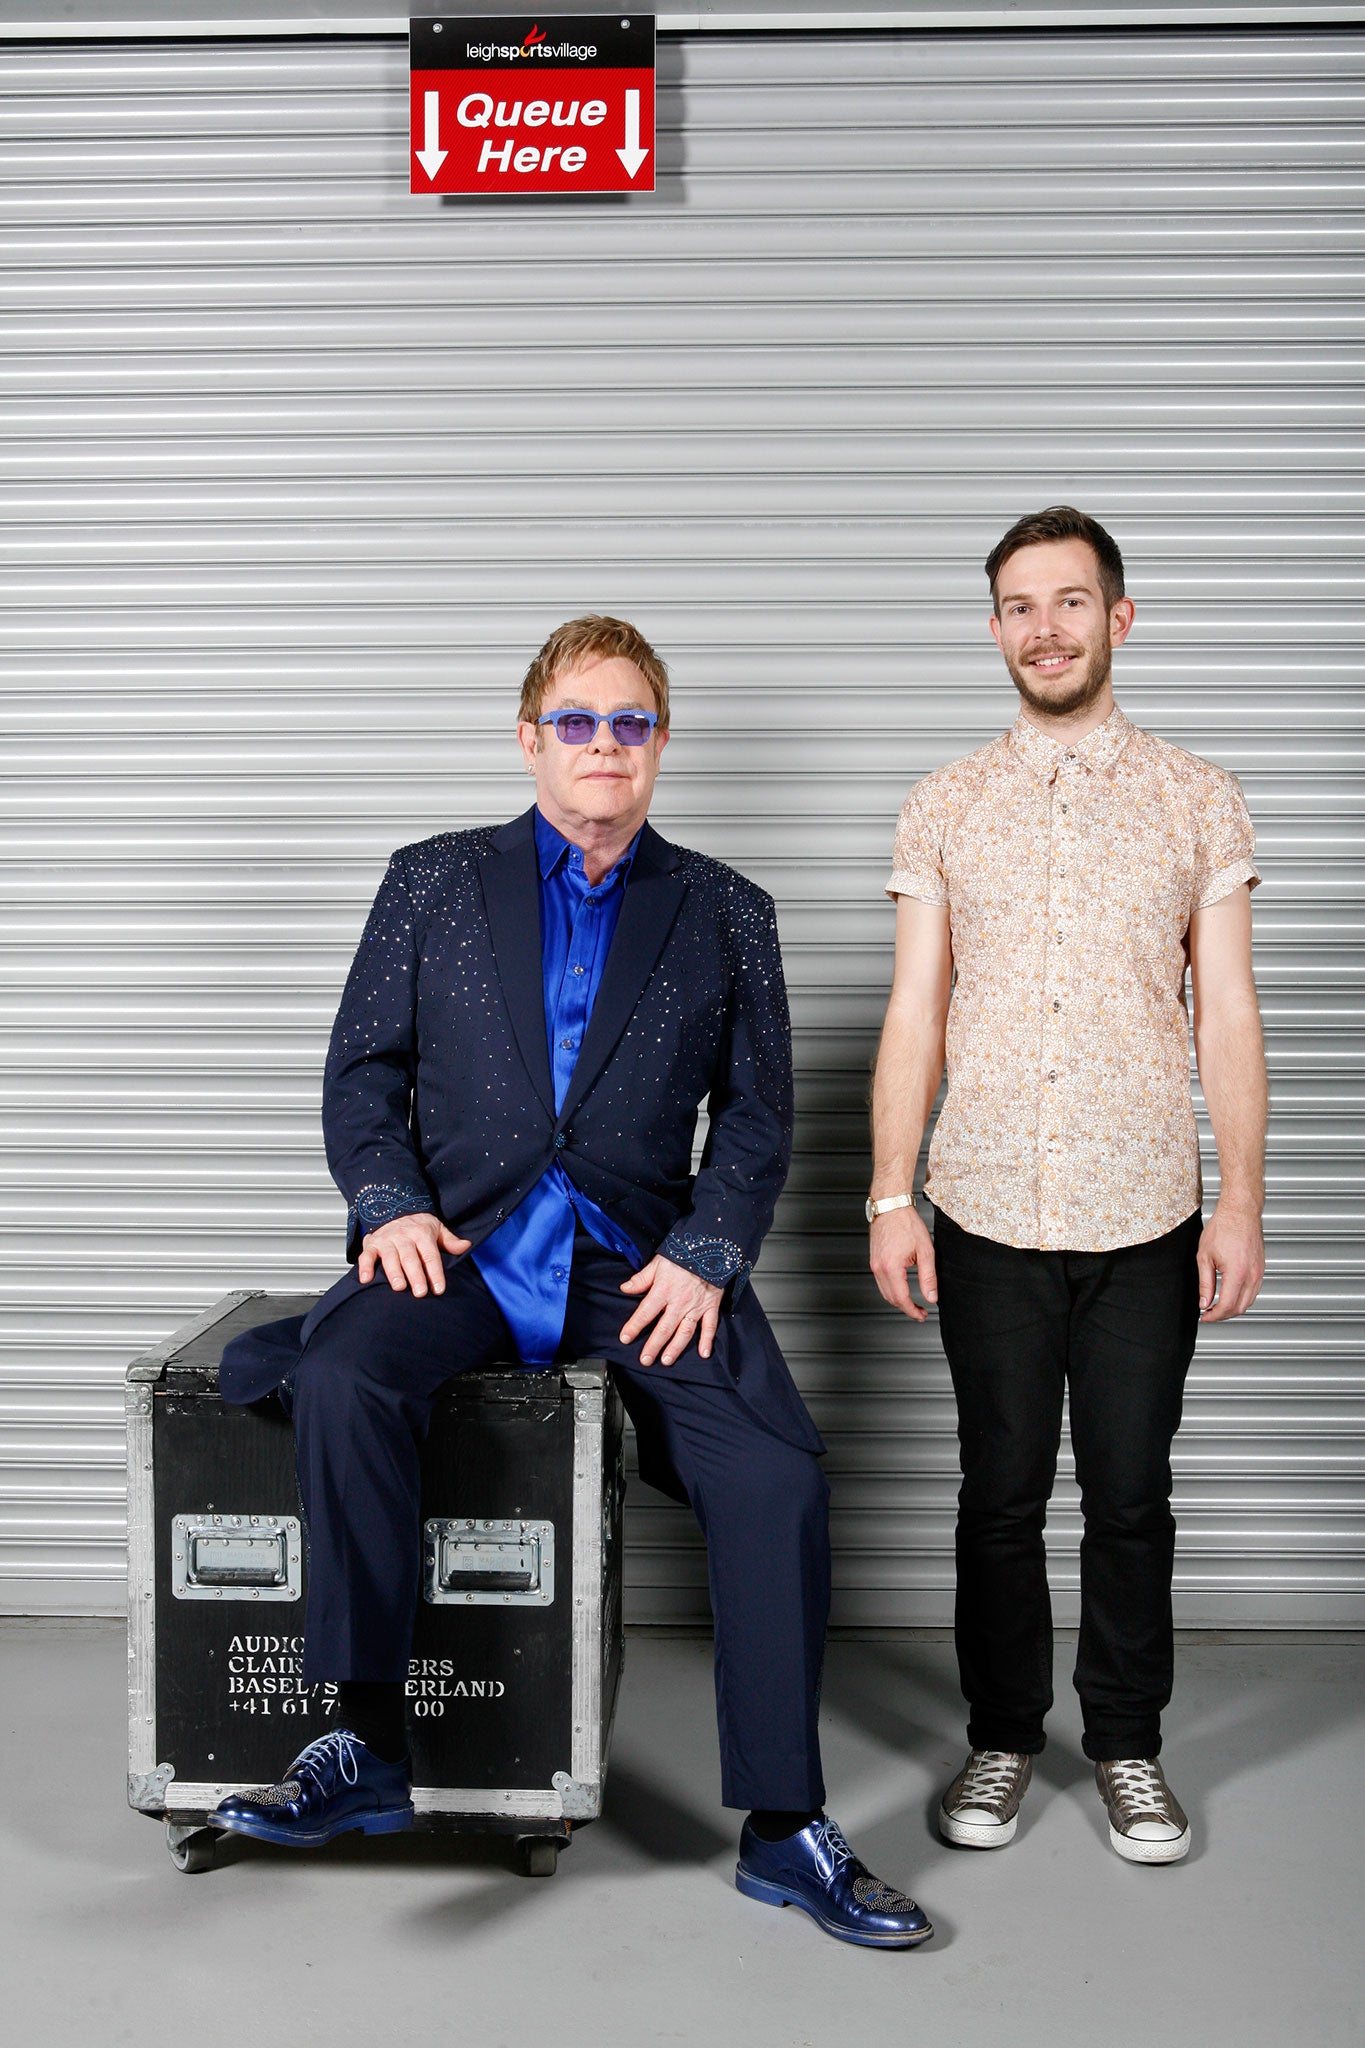 Elton John says of Thomas: 'He's a real character, a snappy dresser and is not afraid to send me up'